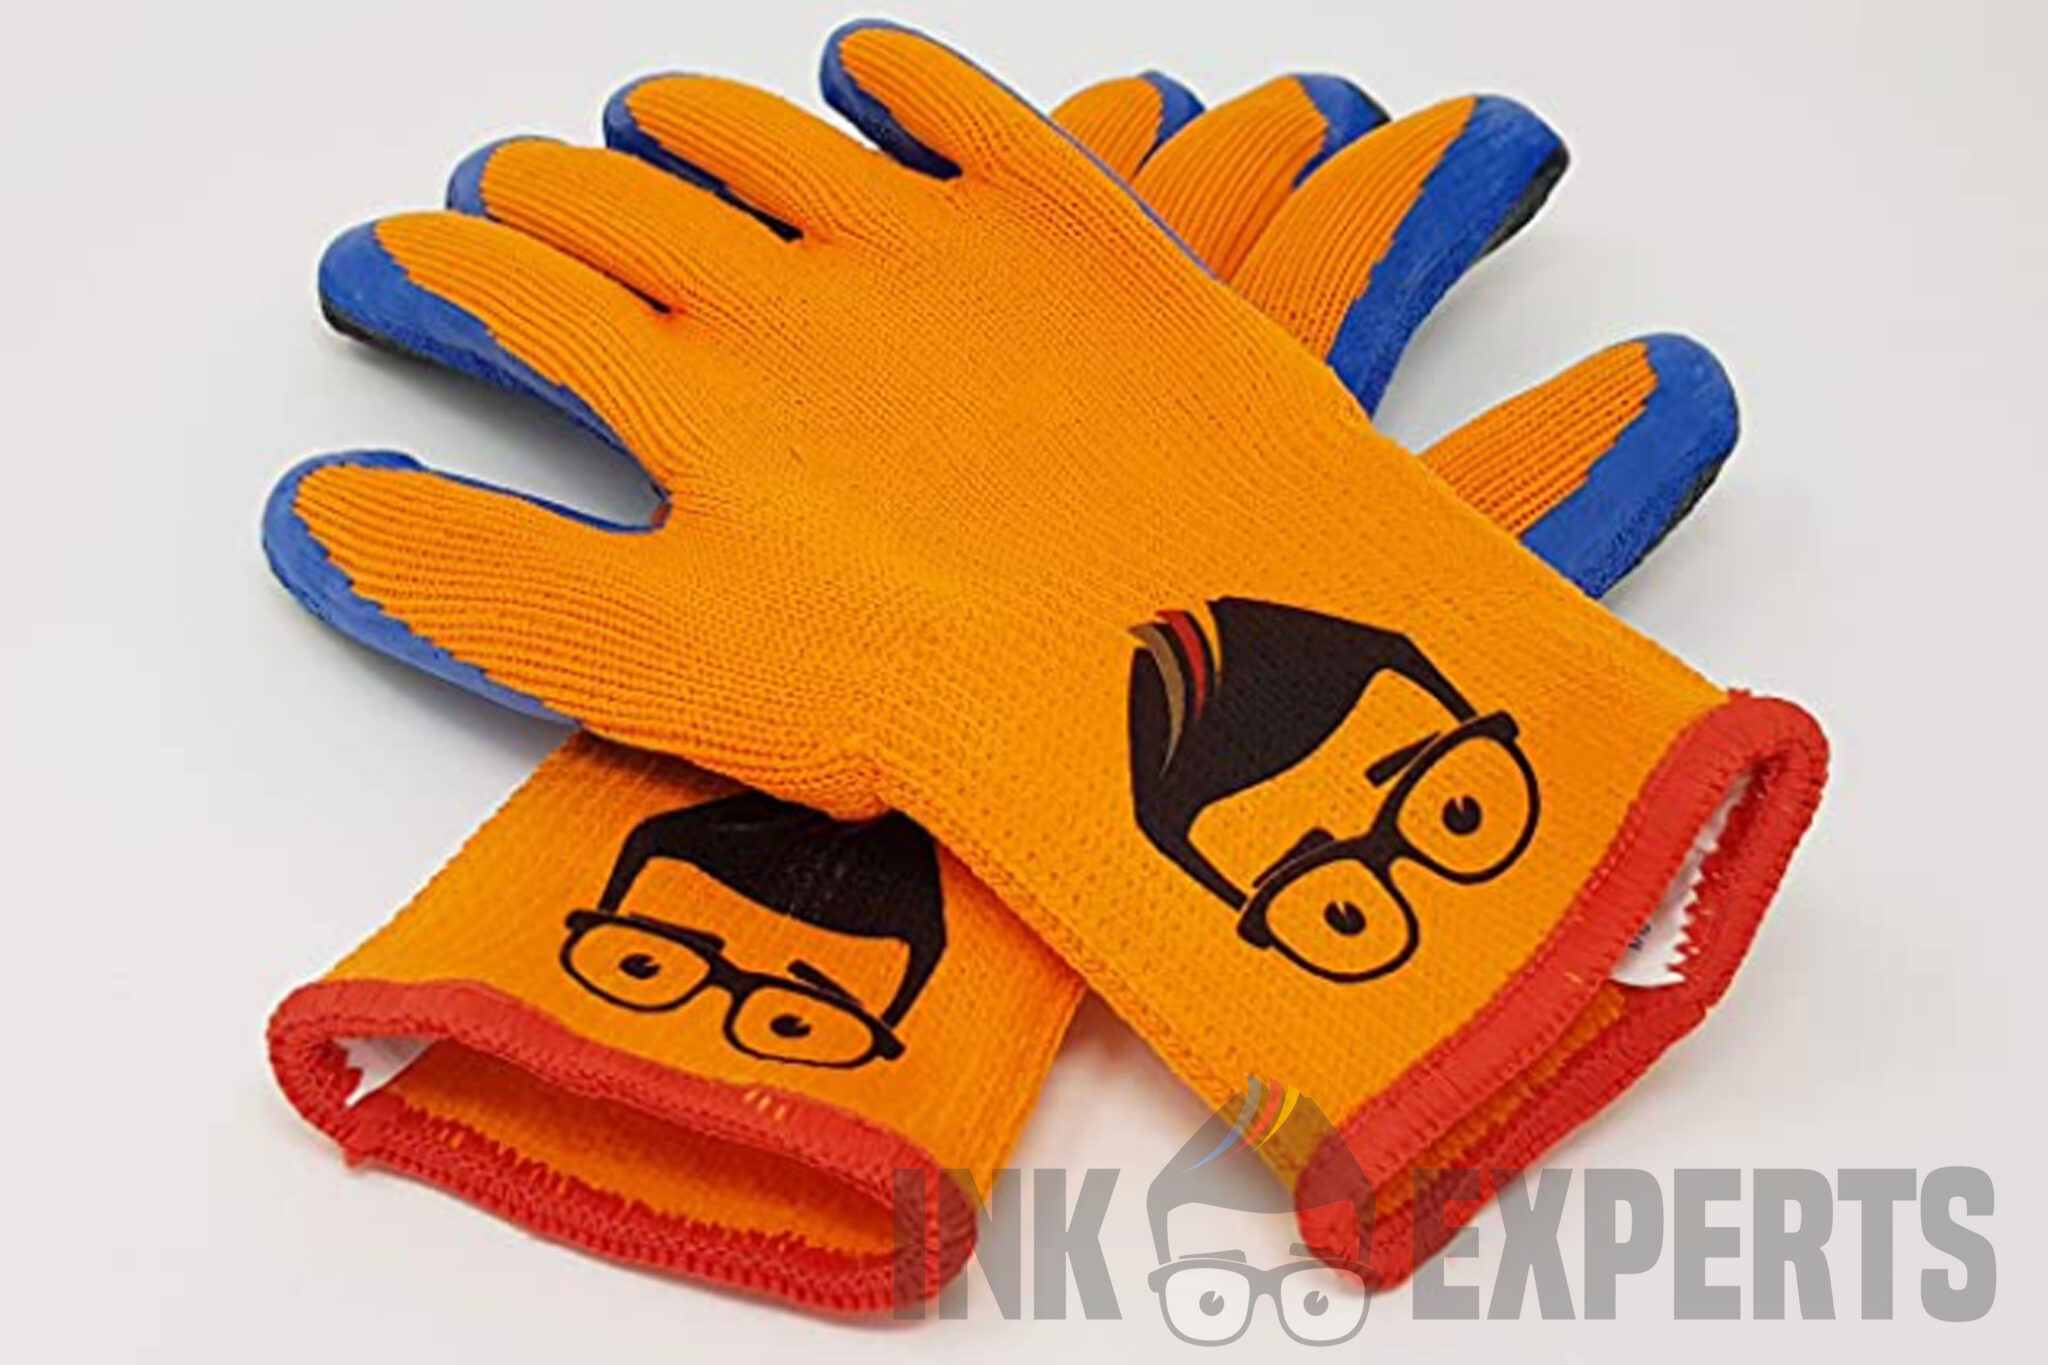 Heat Resistant Gloves for Heat Transfer Pressing | Ink Experts